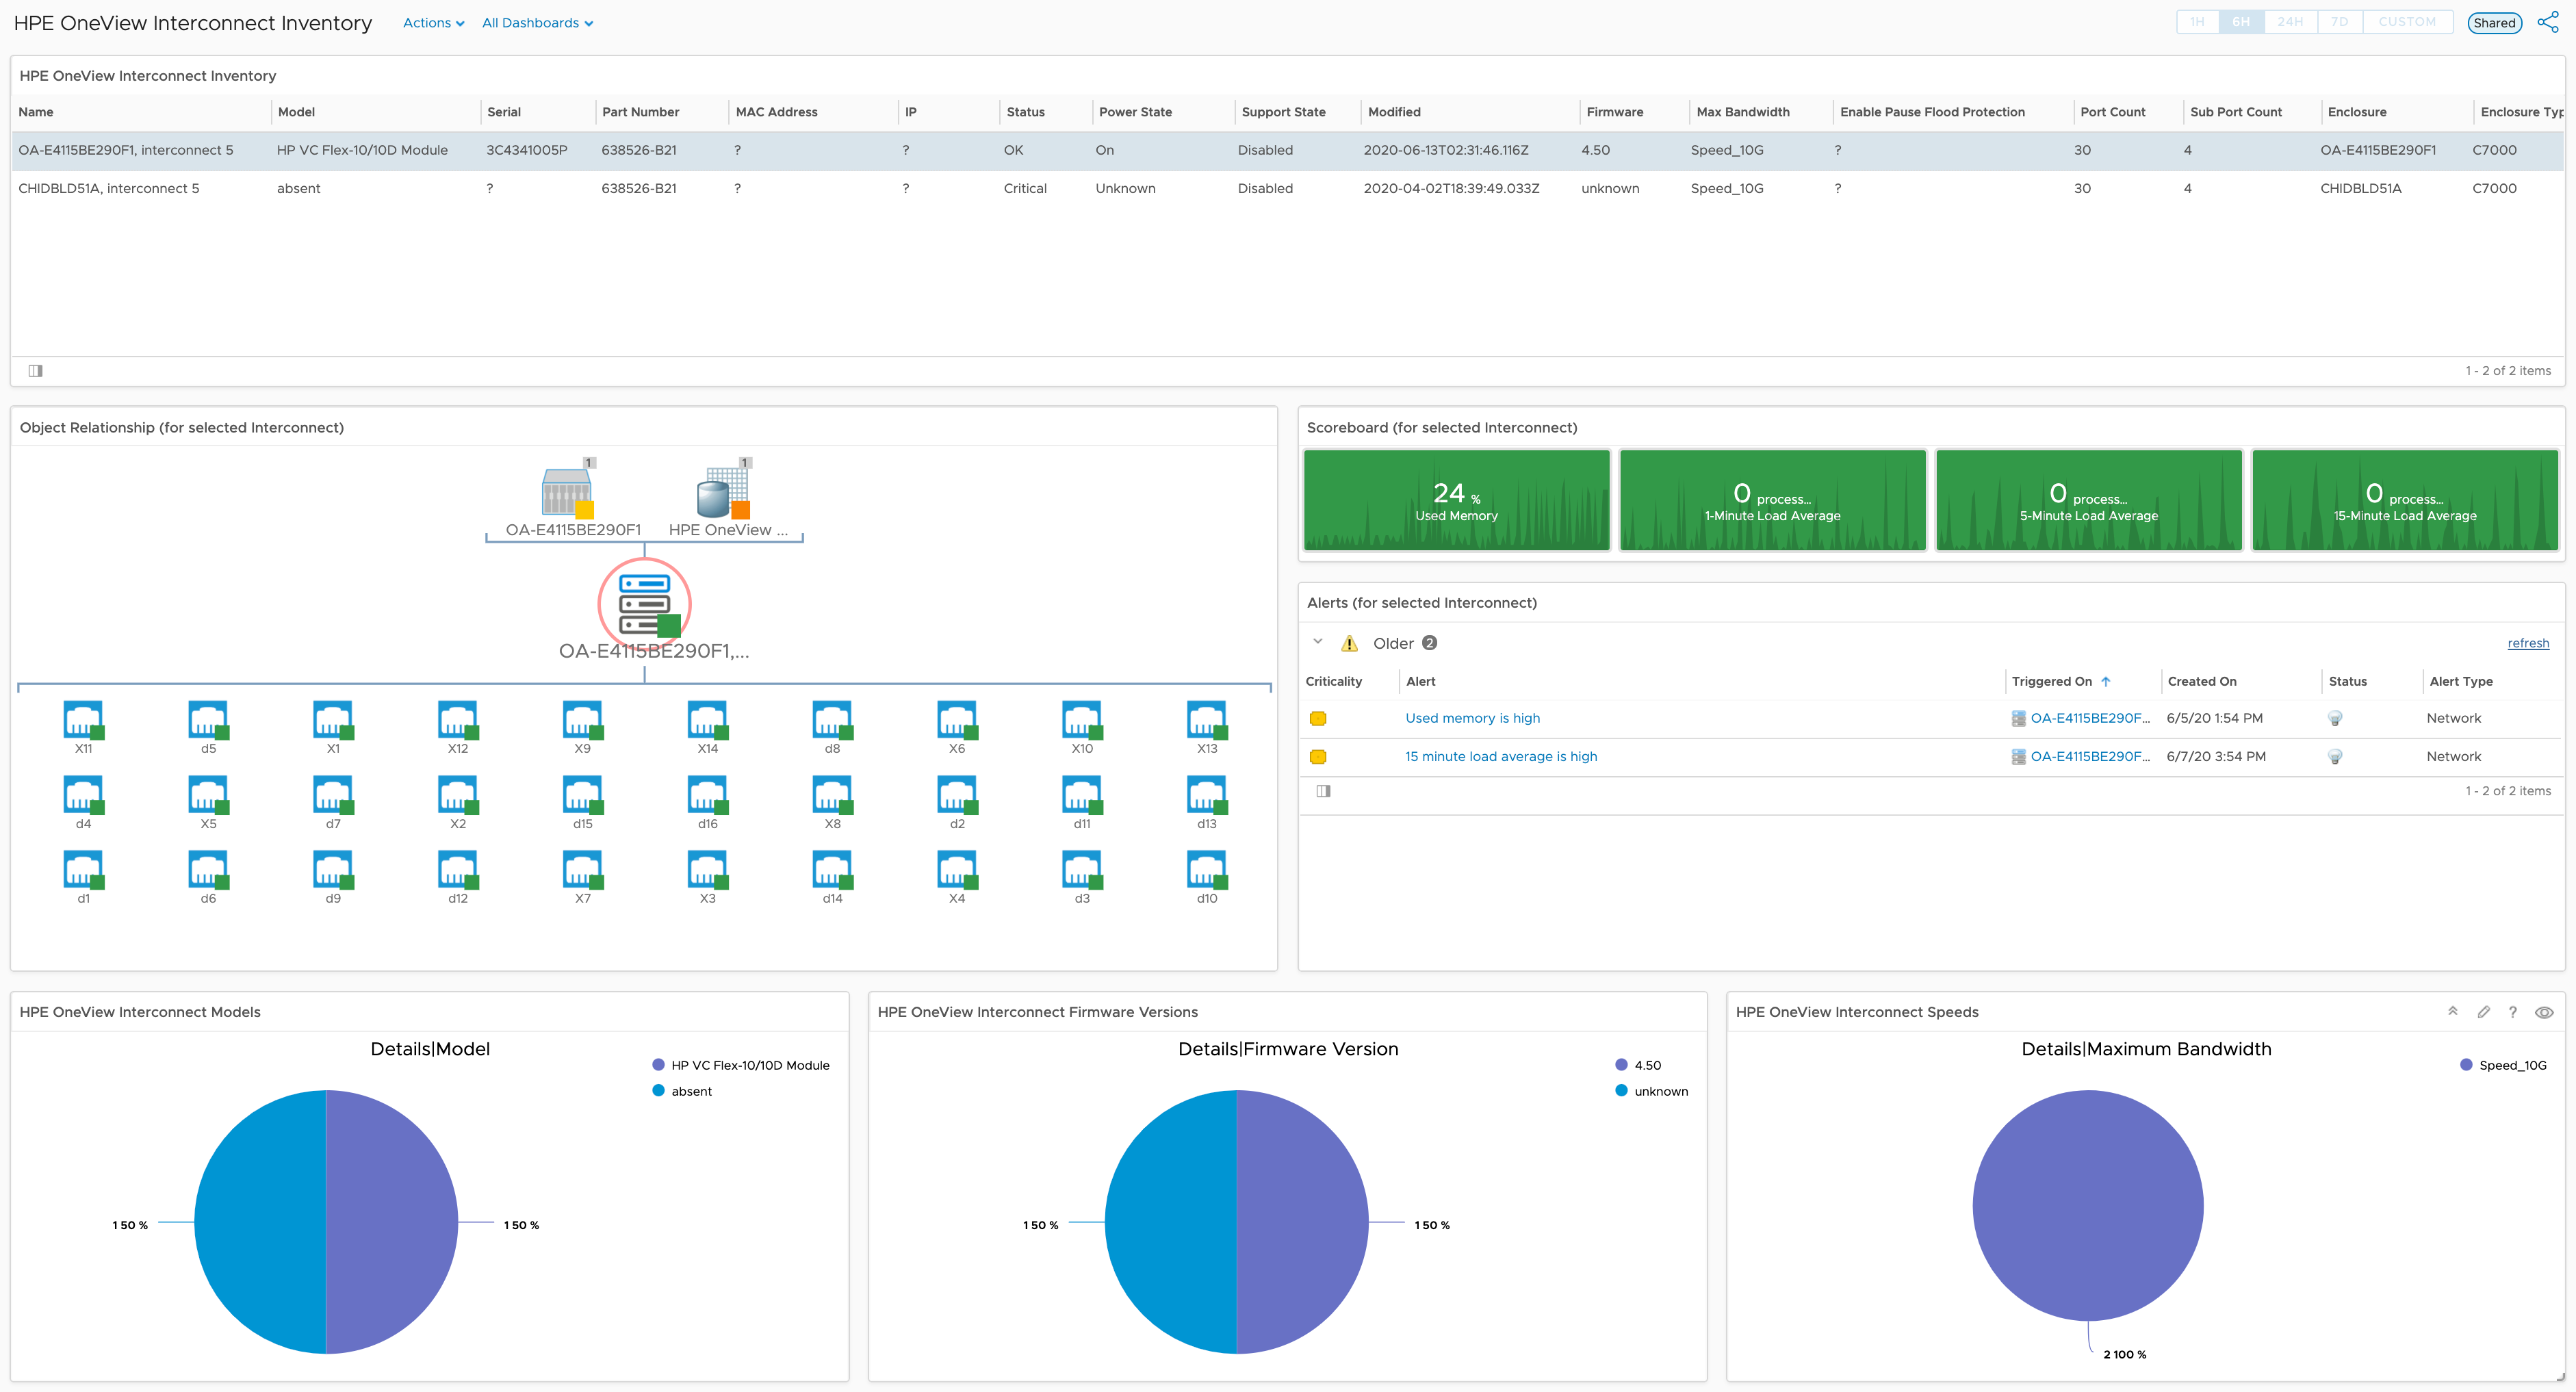 006_hpe_oneview_interconnect_inventory_dashboard